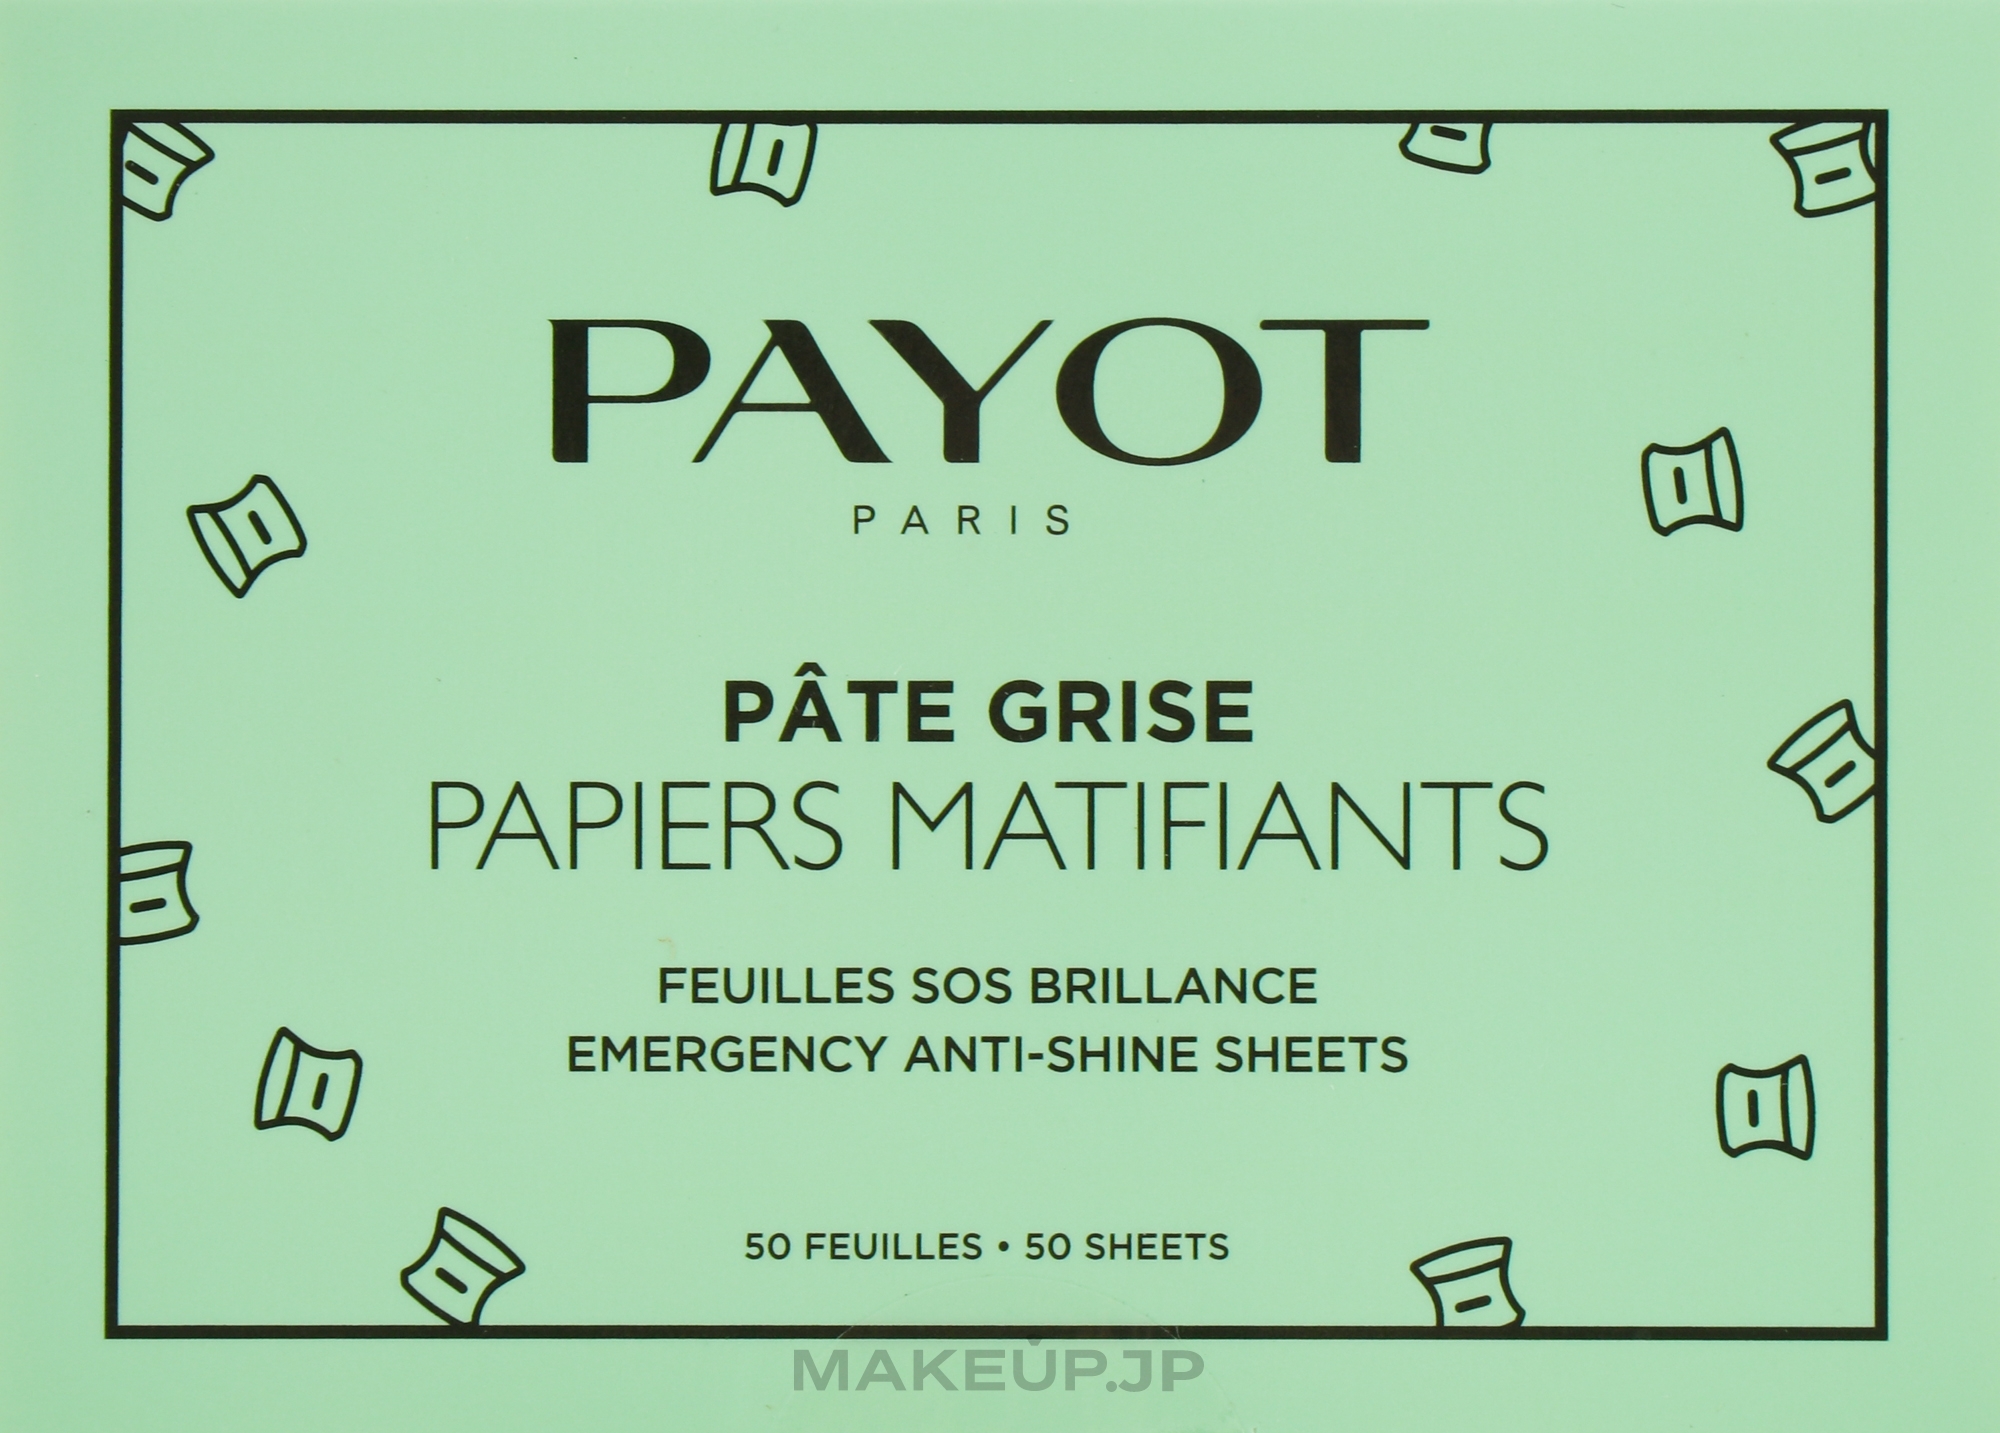 Oil Control Film - Payot Pate Grise Emergency Anti-Shine Sheets — photo 50 szt.